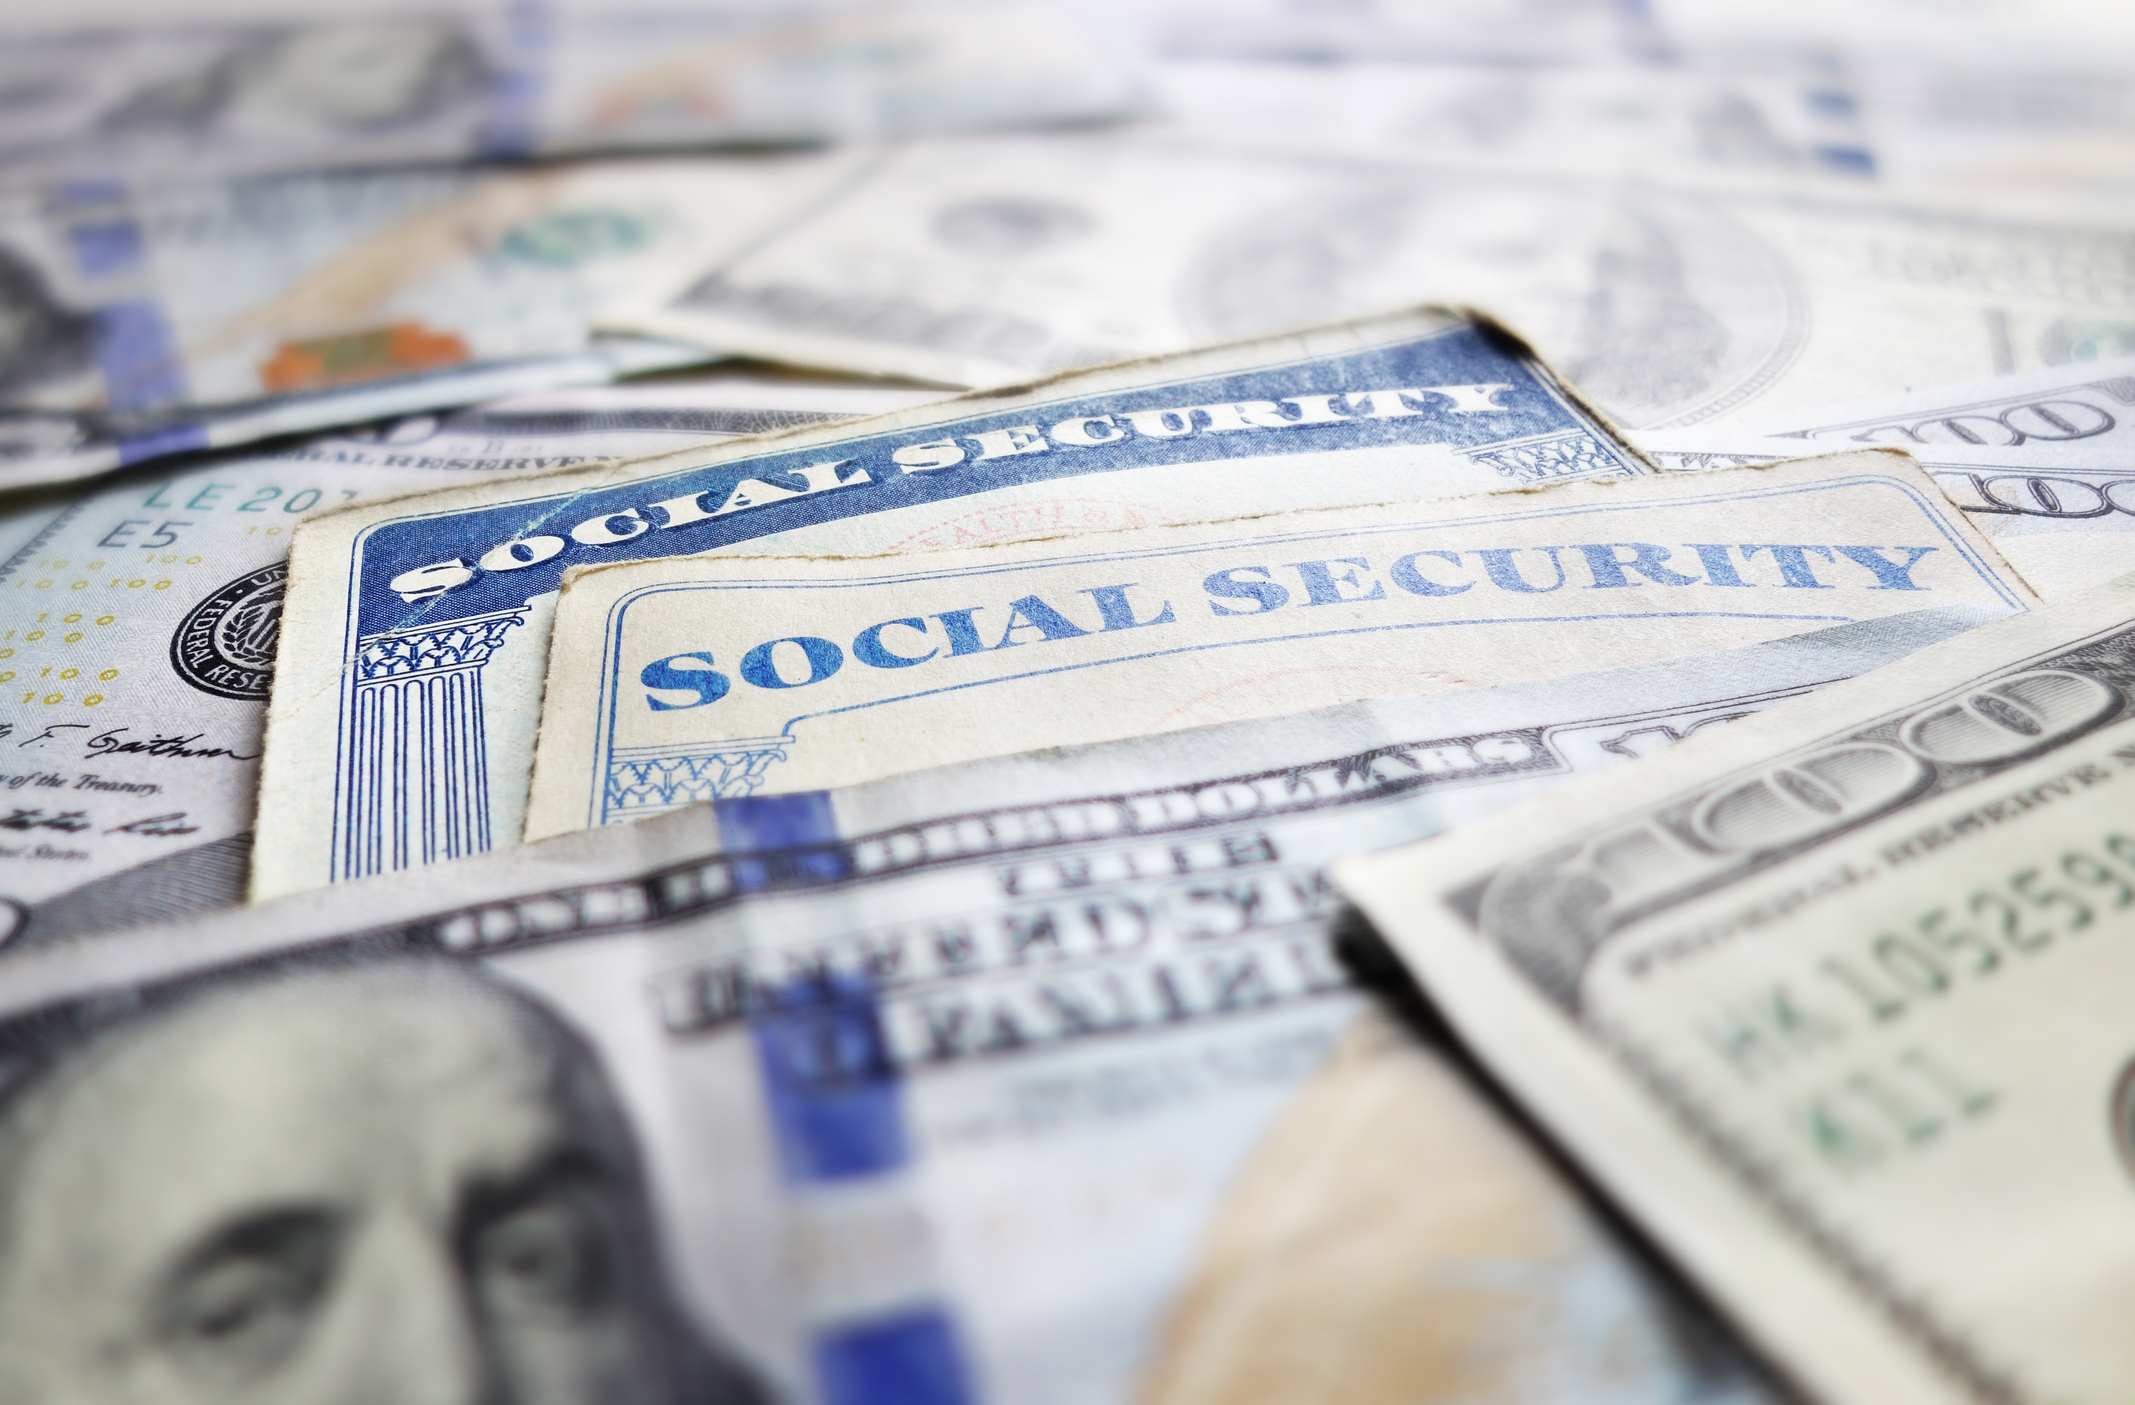 Social Security in the United States - Complete Controller